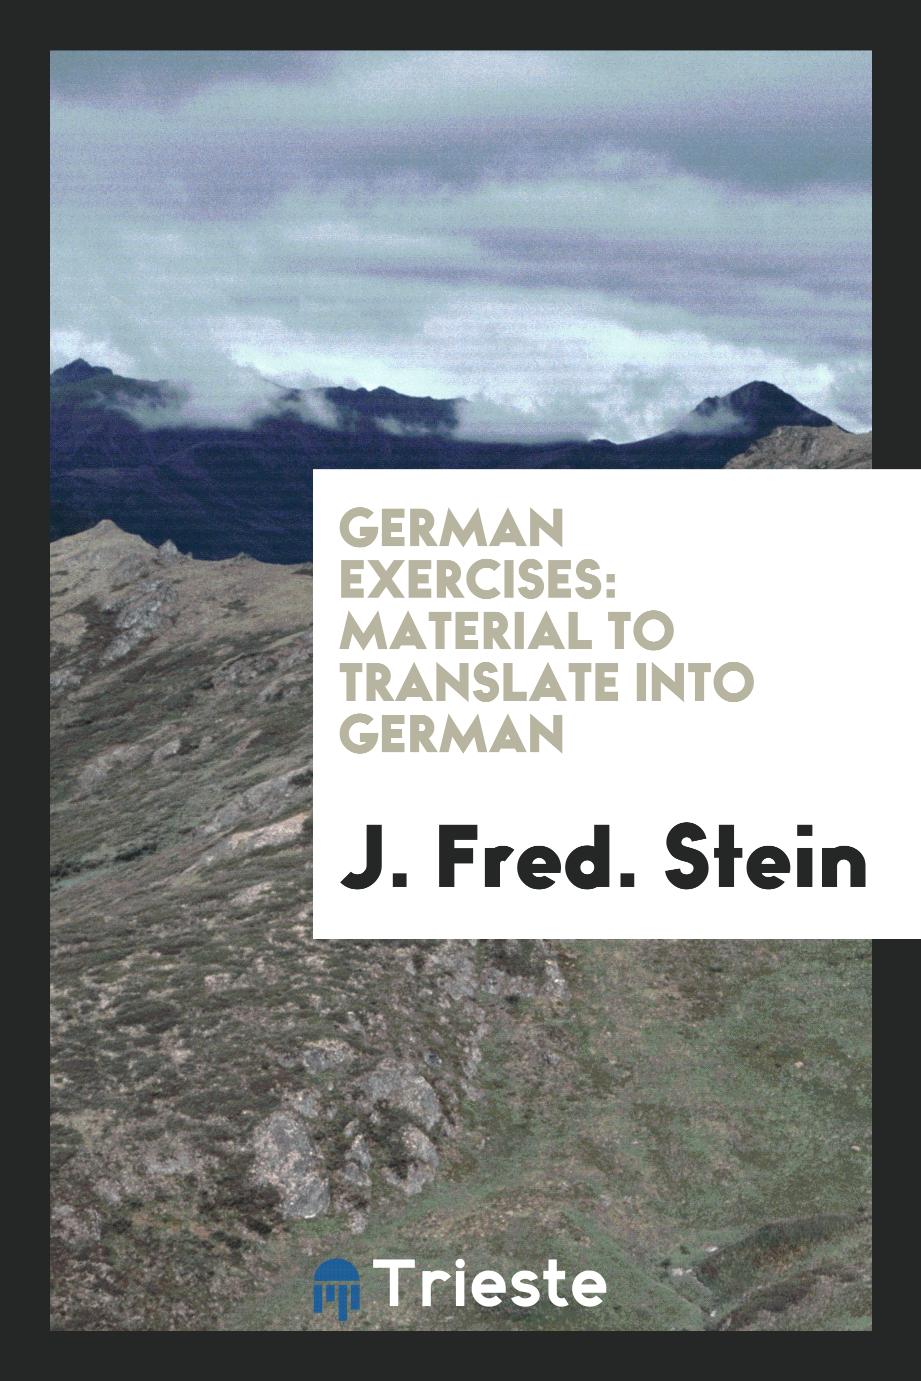 German Exercises: Material to Translate into German